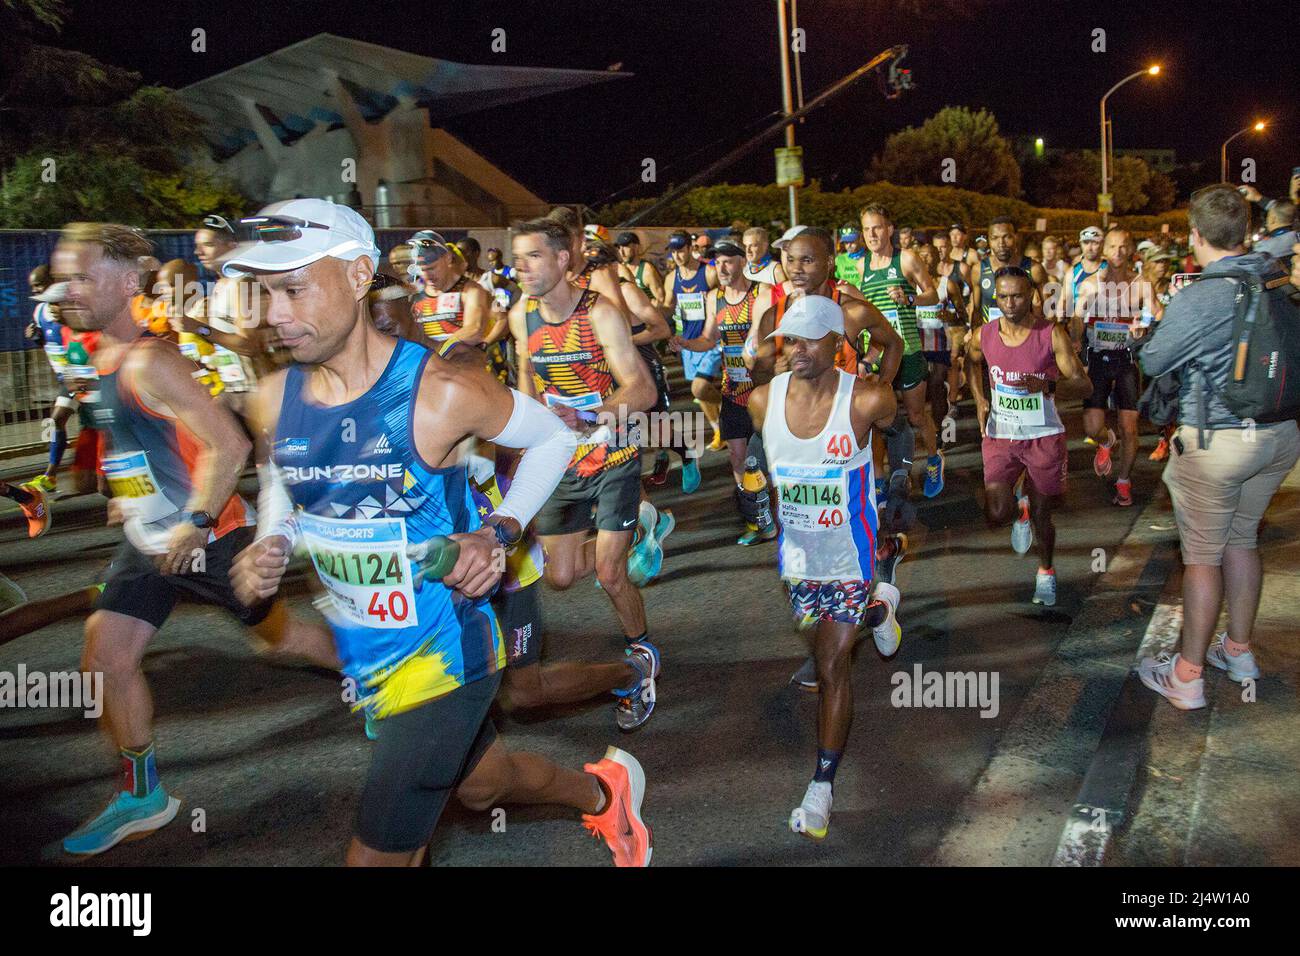 Cape Town, South Africa. 17th Apr, 2022. Runners compete during the ultra marathon of Two Oceans Marathon in Cape Town, South Africa, on April 17, 2022. The two-day Two Oceans Marathon took place after a two-year hiatus due to COVID-19 pandemic. Credit: Francisco Scarbar/Xinhua/Alamy Live News Stock Photo